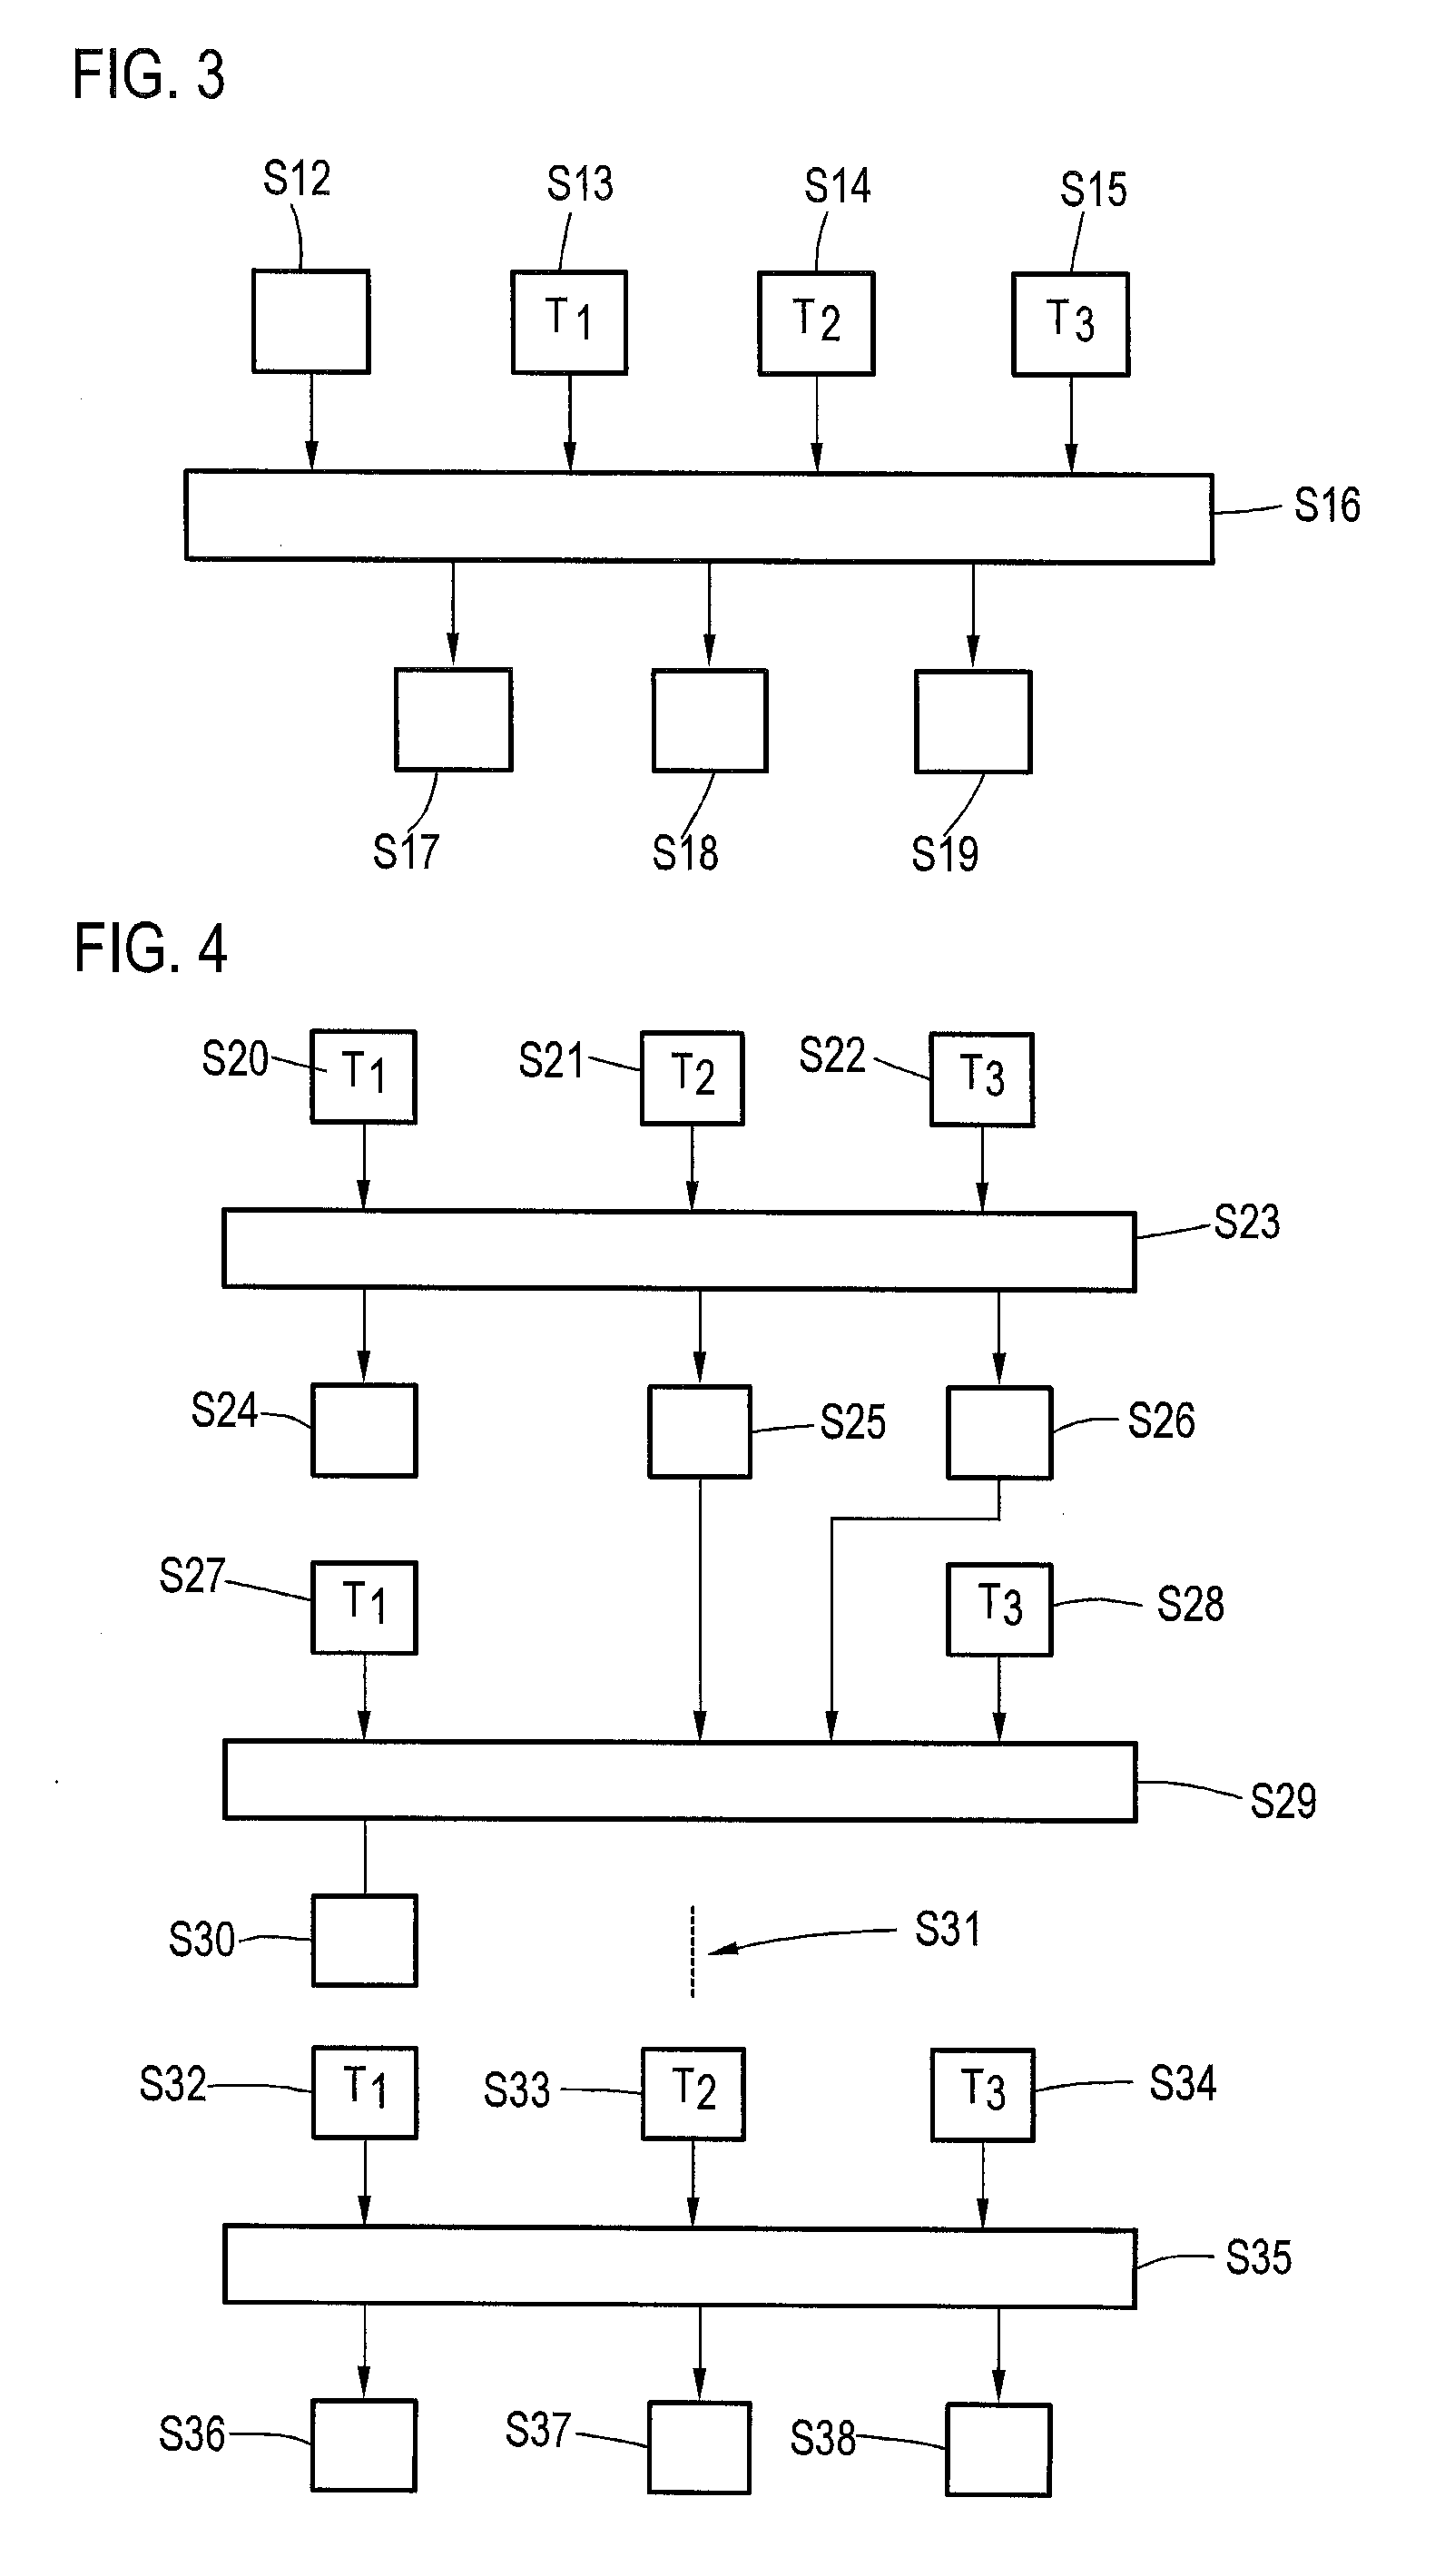 Method for determining at least one gas parameter of a flowing gas